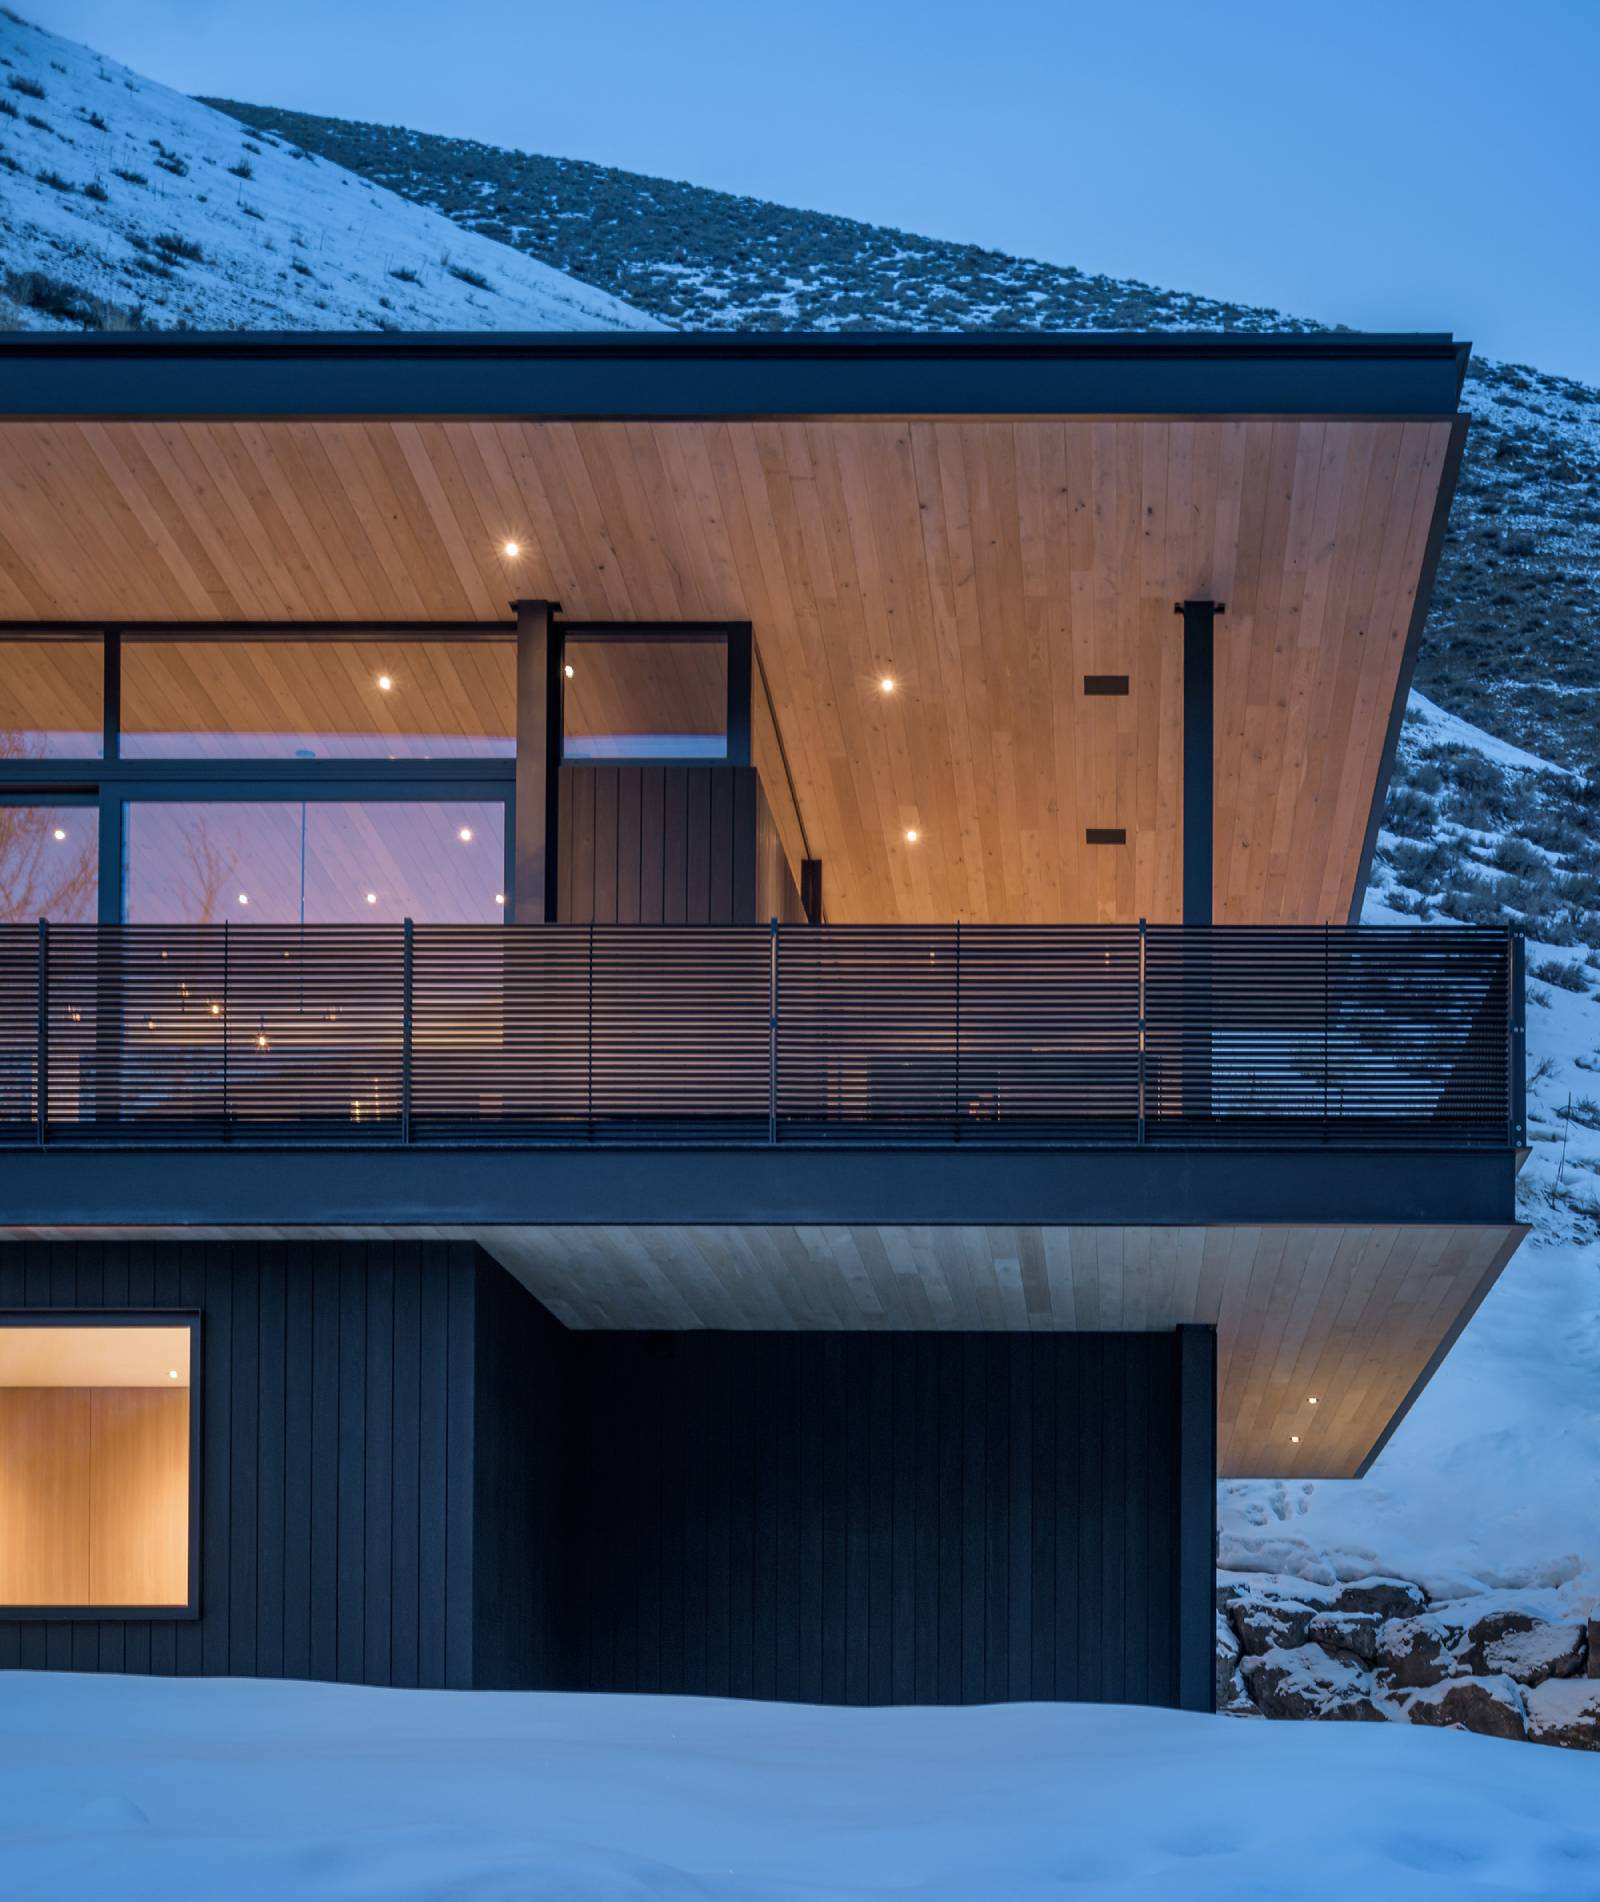 Exterior view of the upper deck at night at Avalanche Chalet, a custom home designed and built by Farmer Payne Architects.